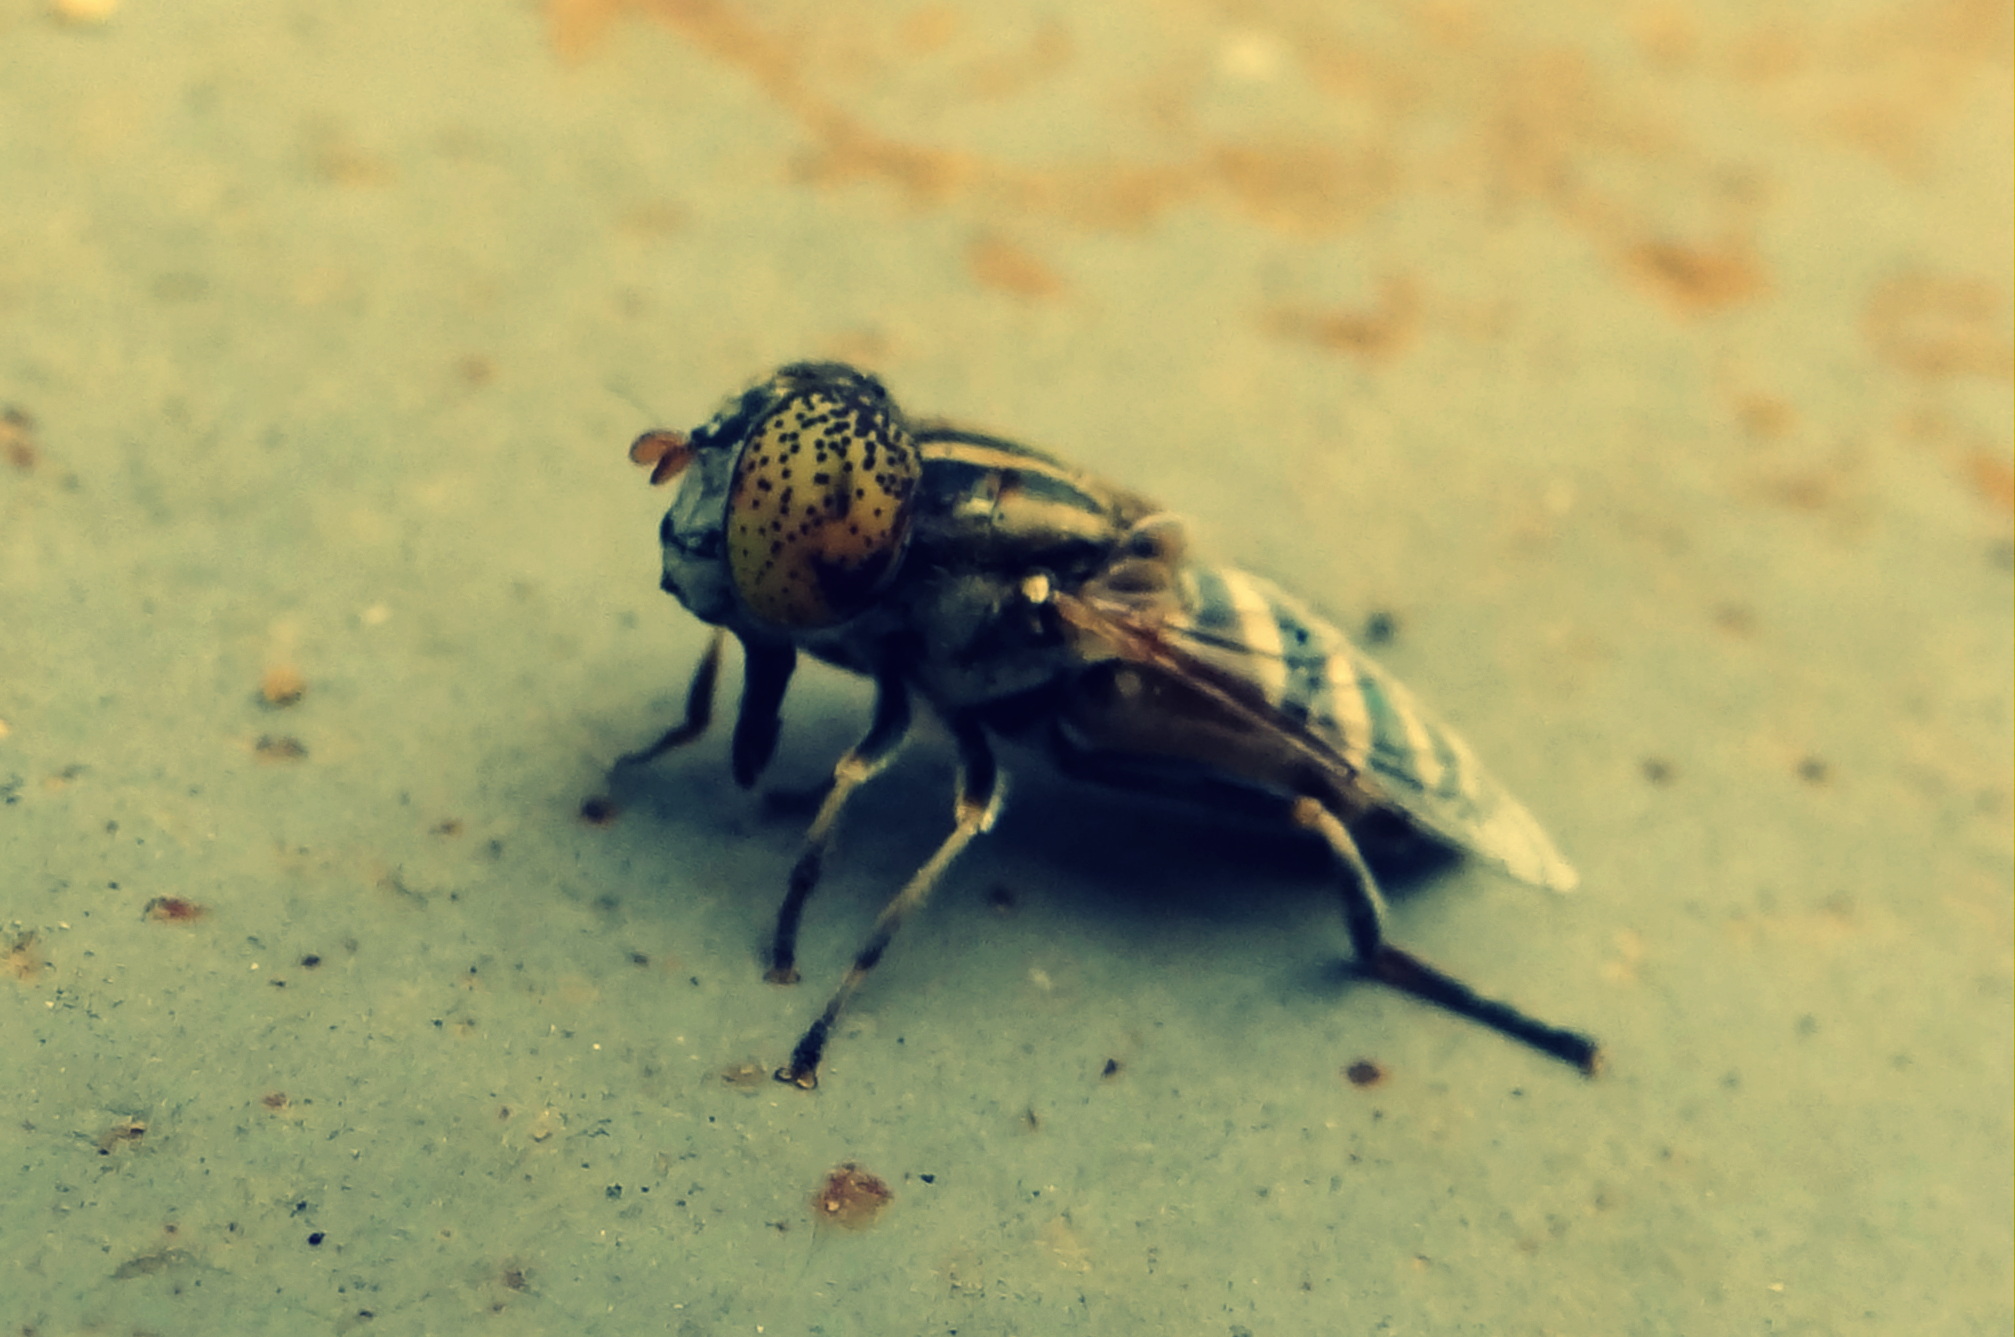 File:HOUSE FLY.jpg - Wikimedia Commons